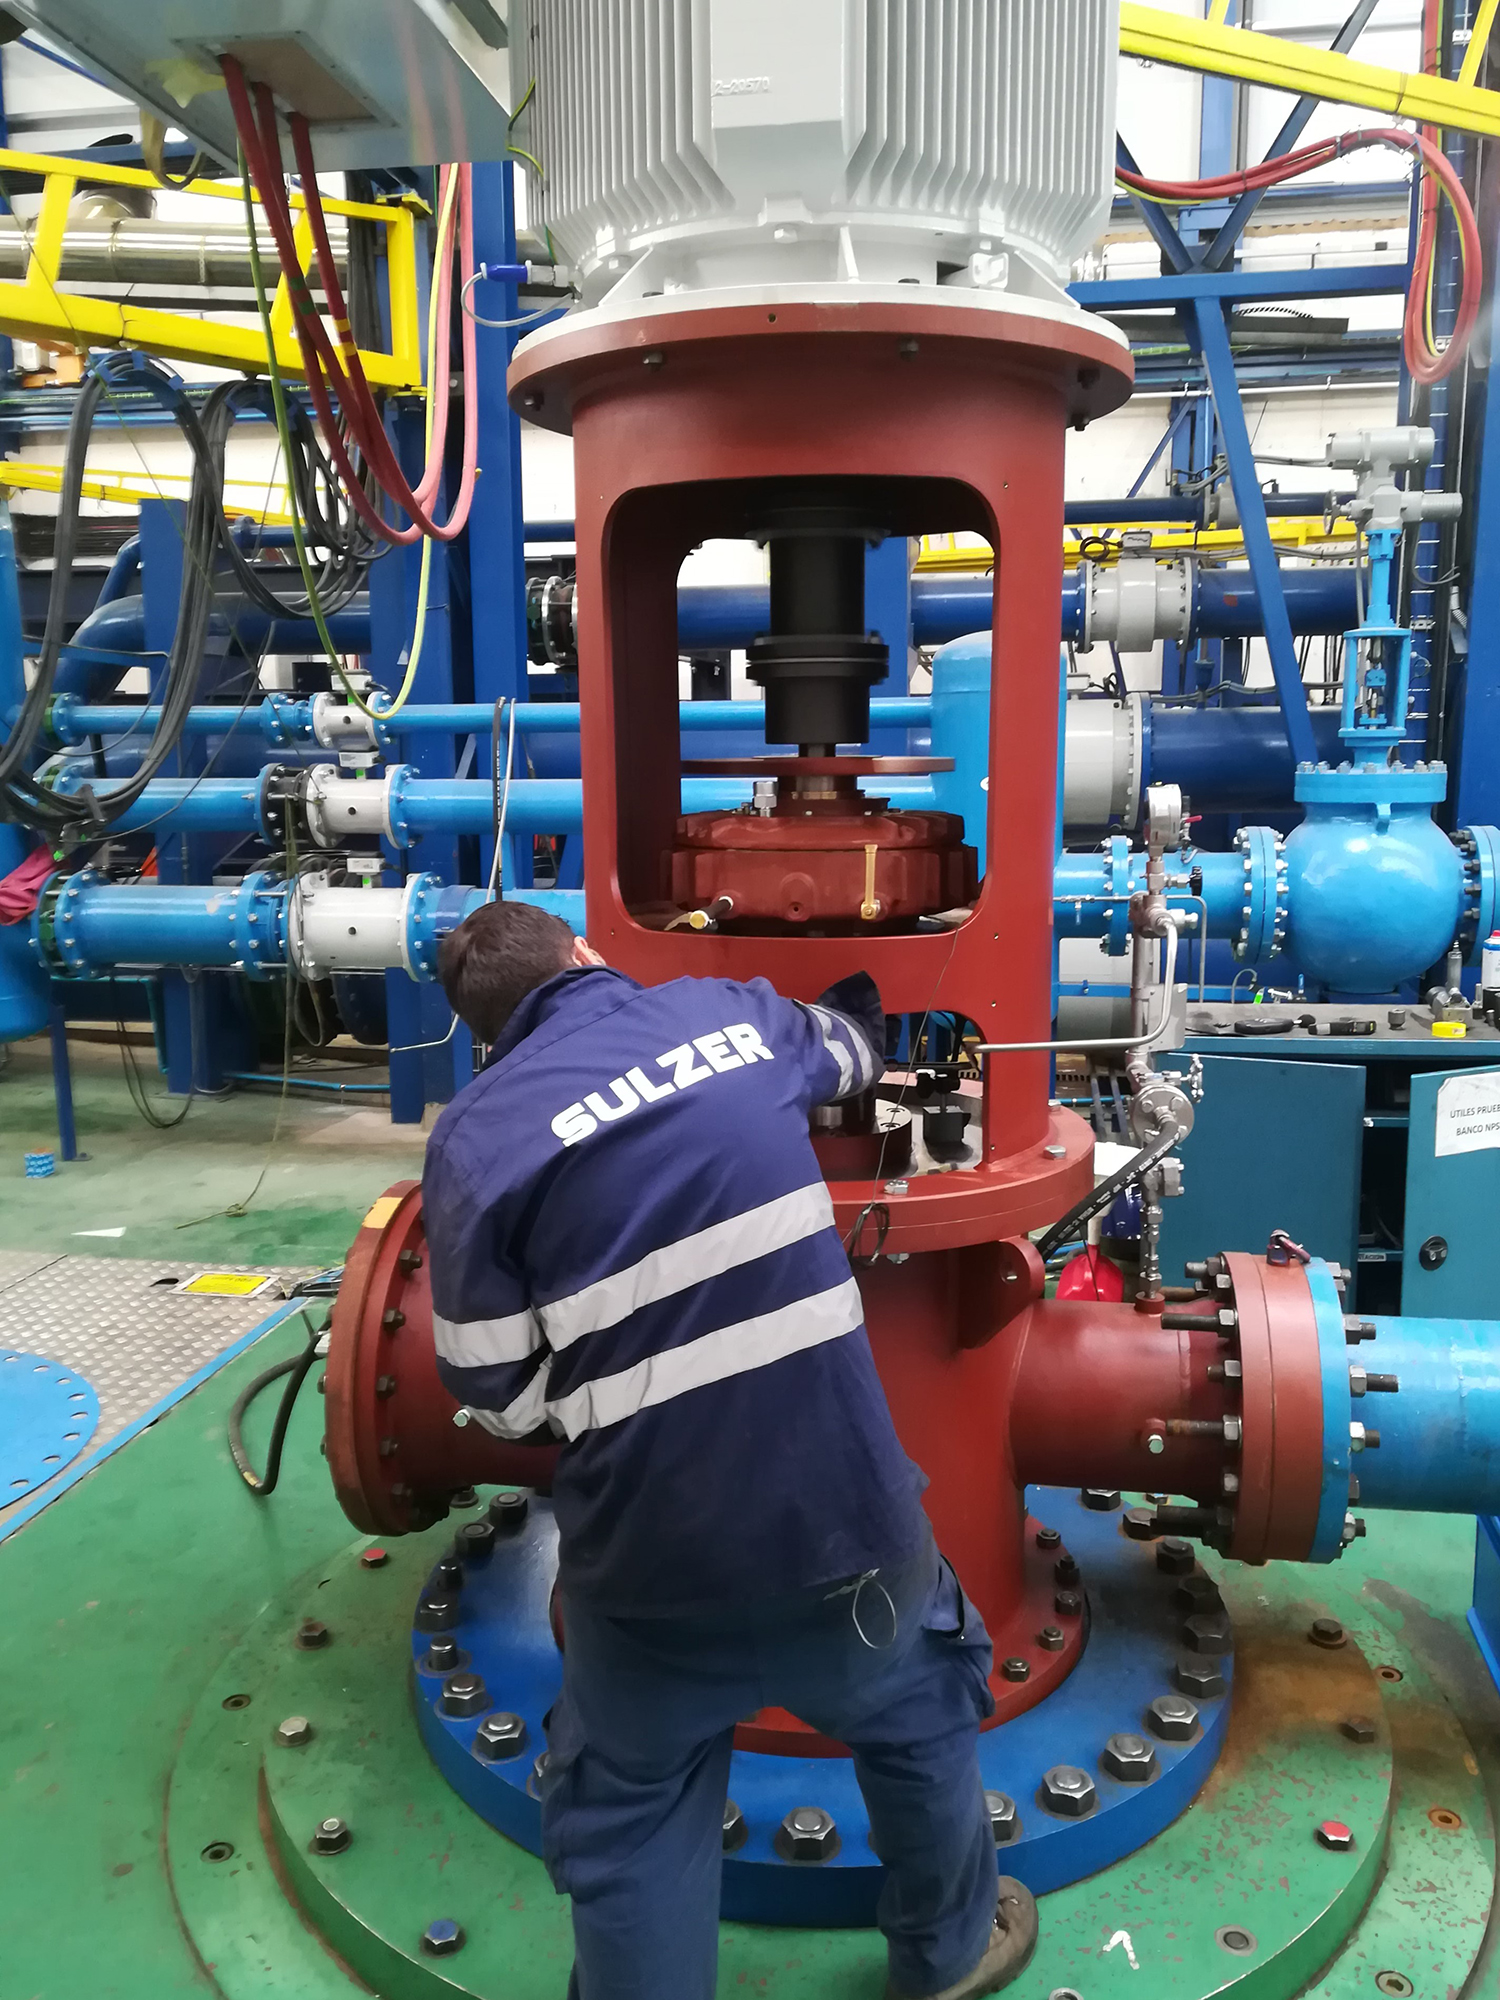 Every pump was comprehensively tested before being dispatched to the customer